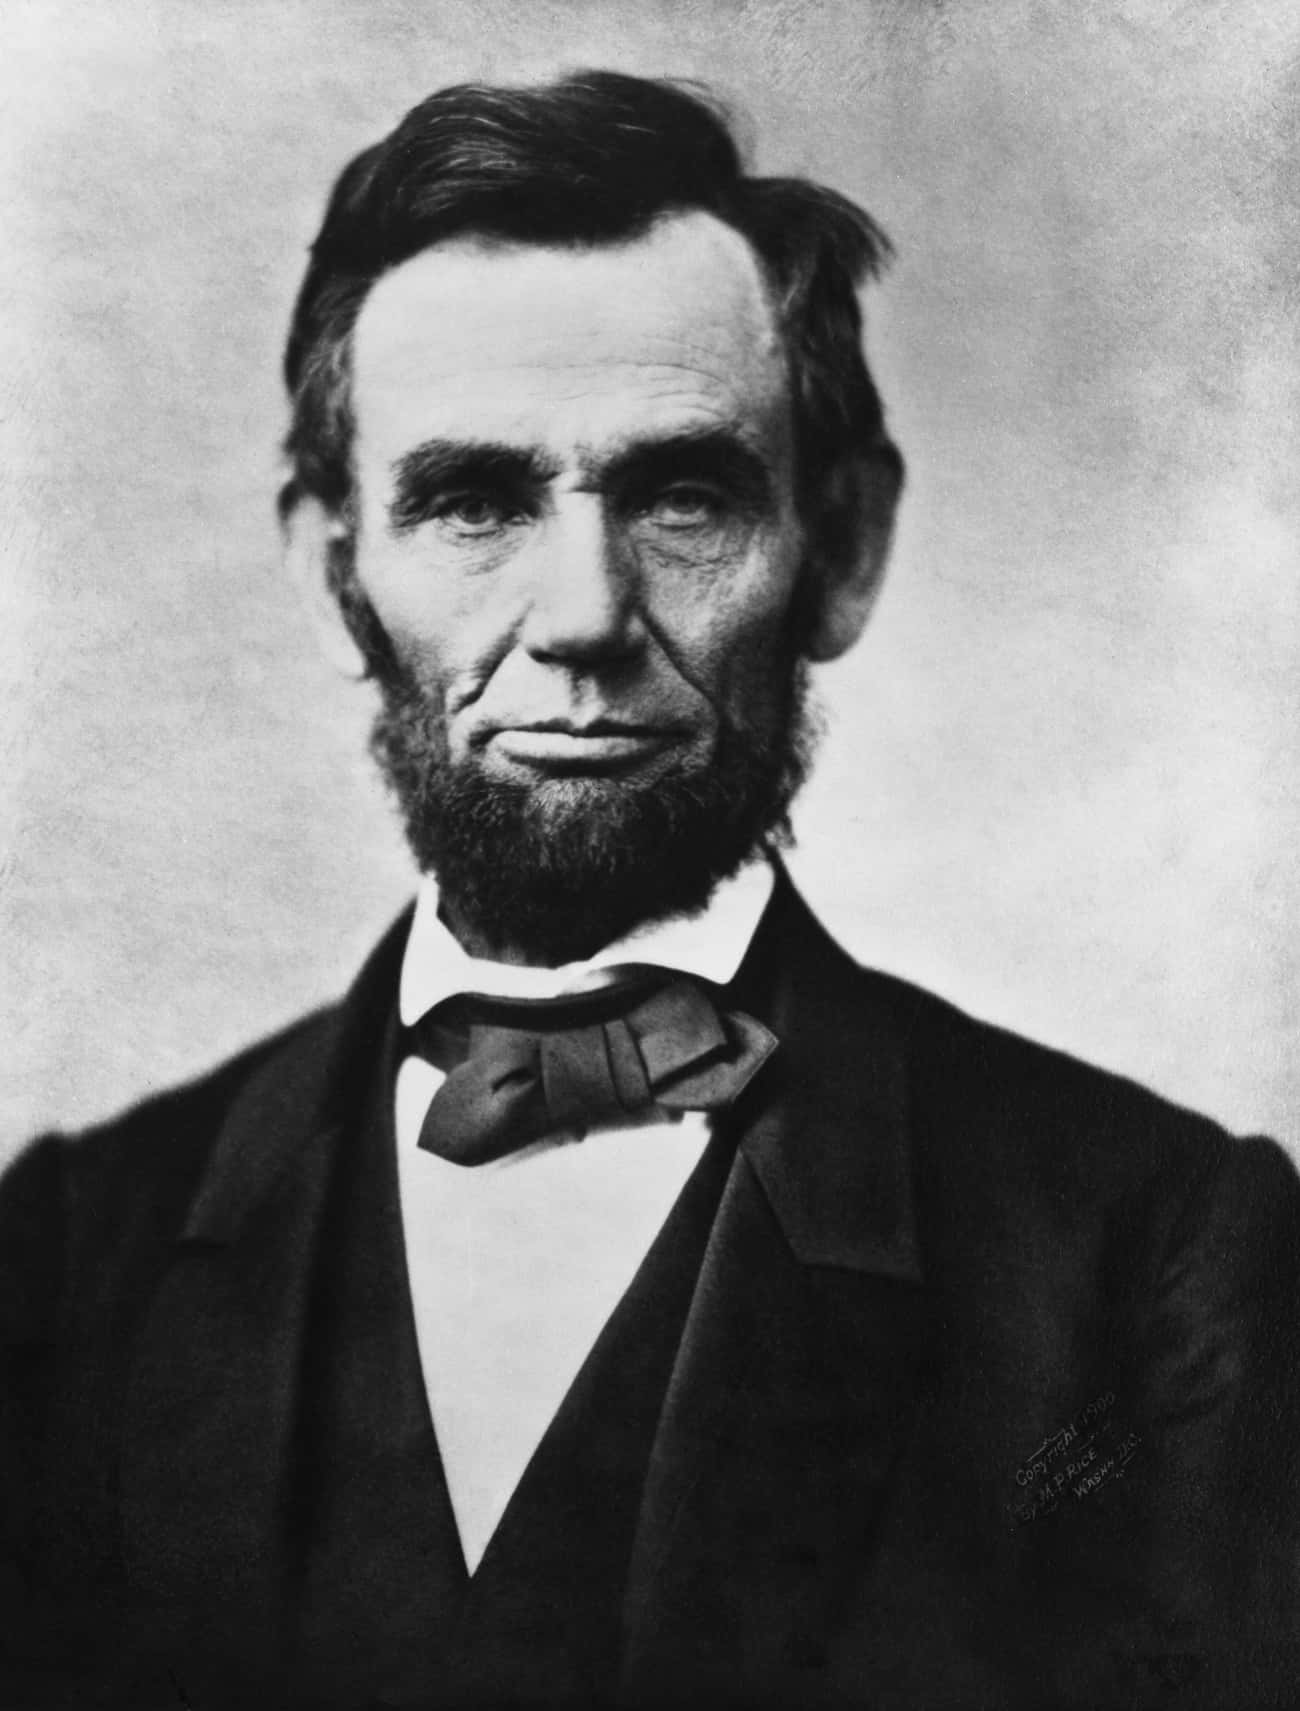 Abraham Lincoln Channeled His Despair To Help Others